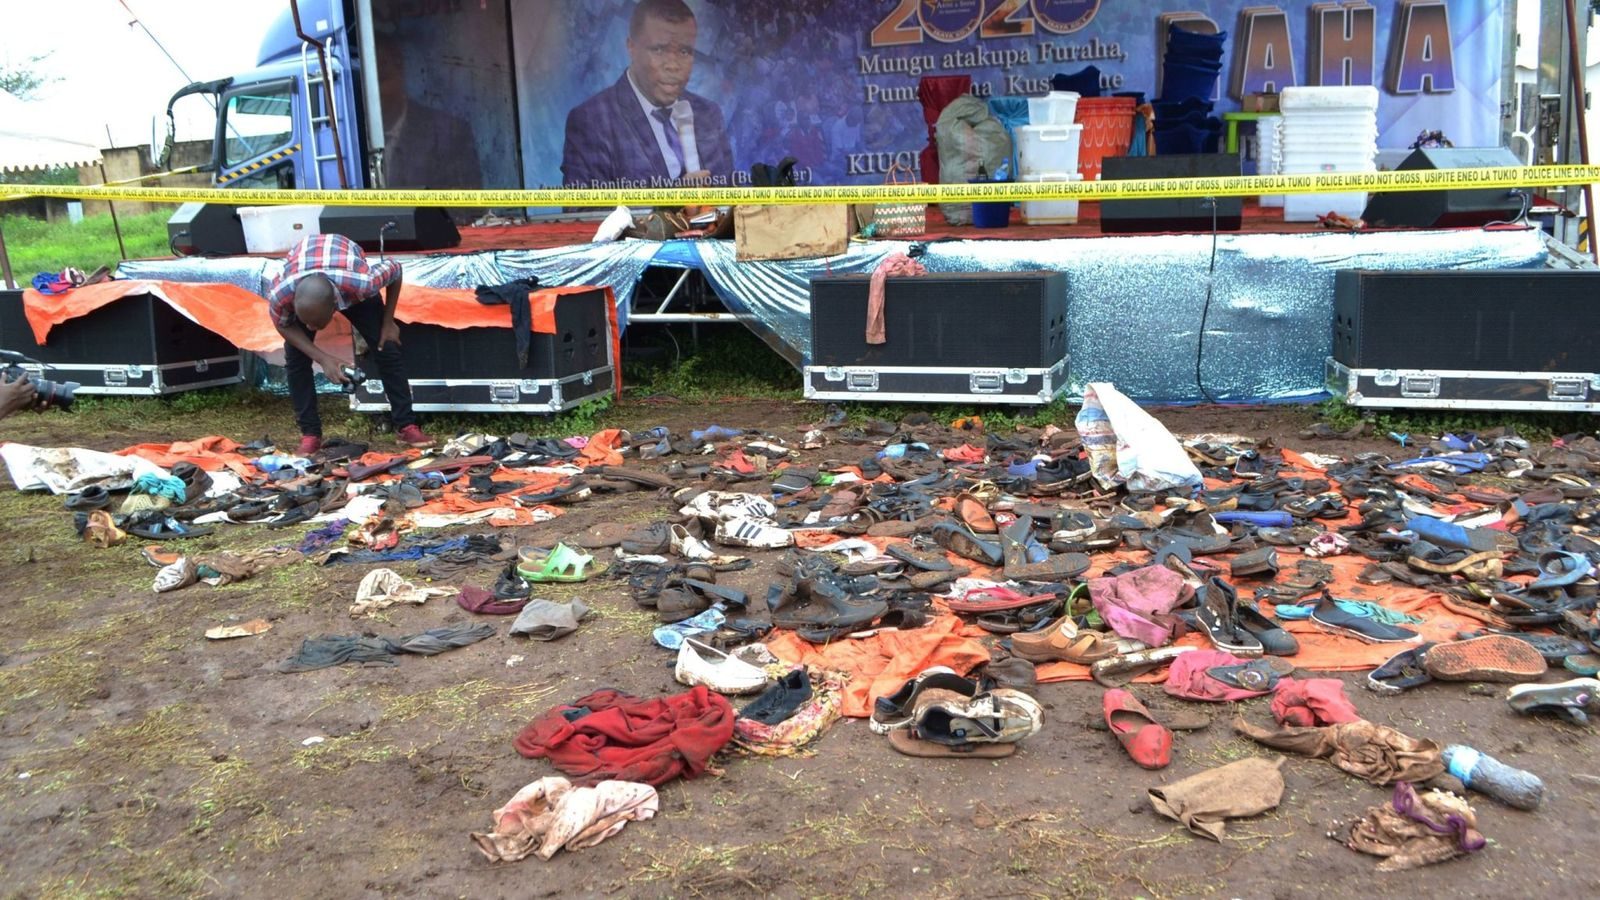 The aftermath of the deadly stampede at the outdoor prayer meeting